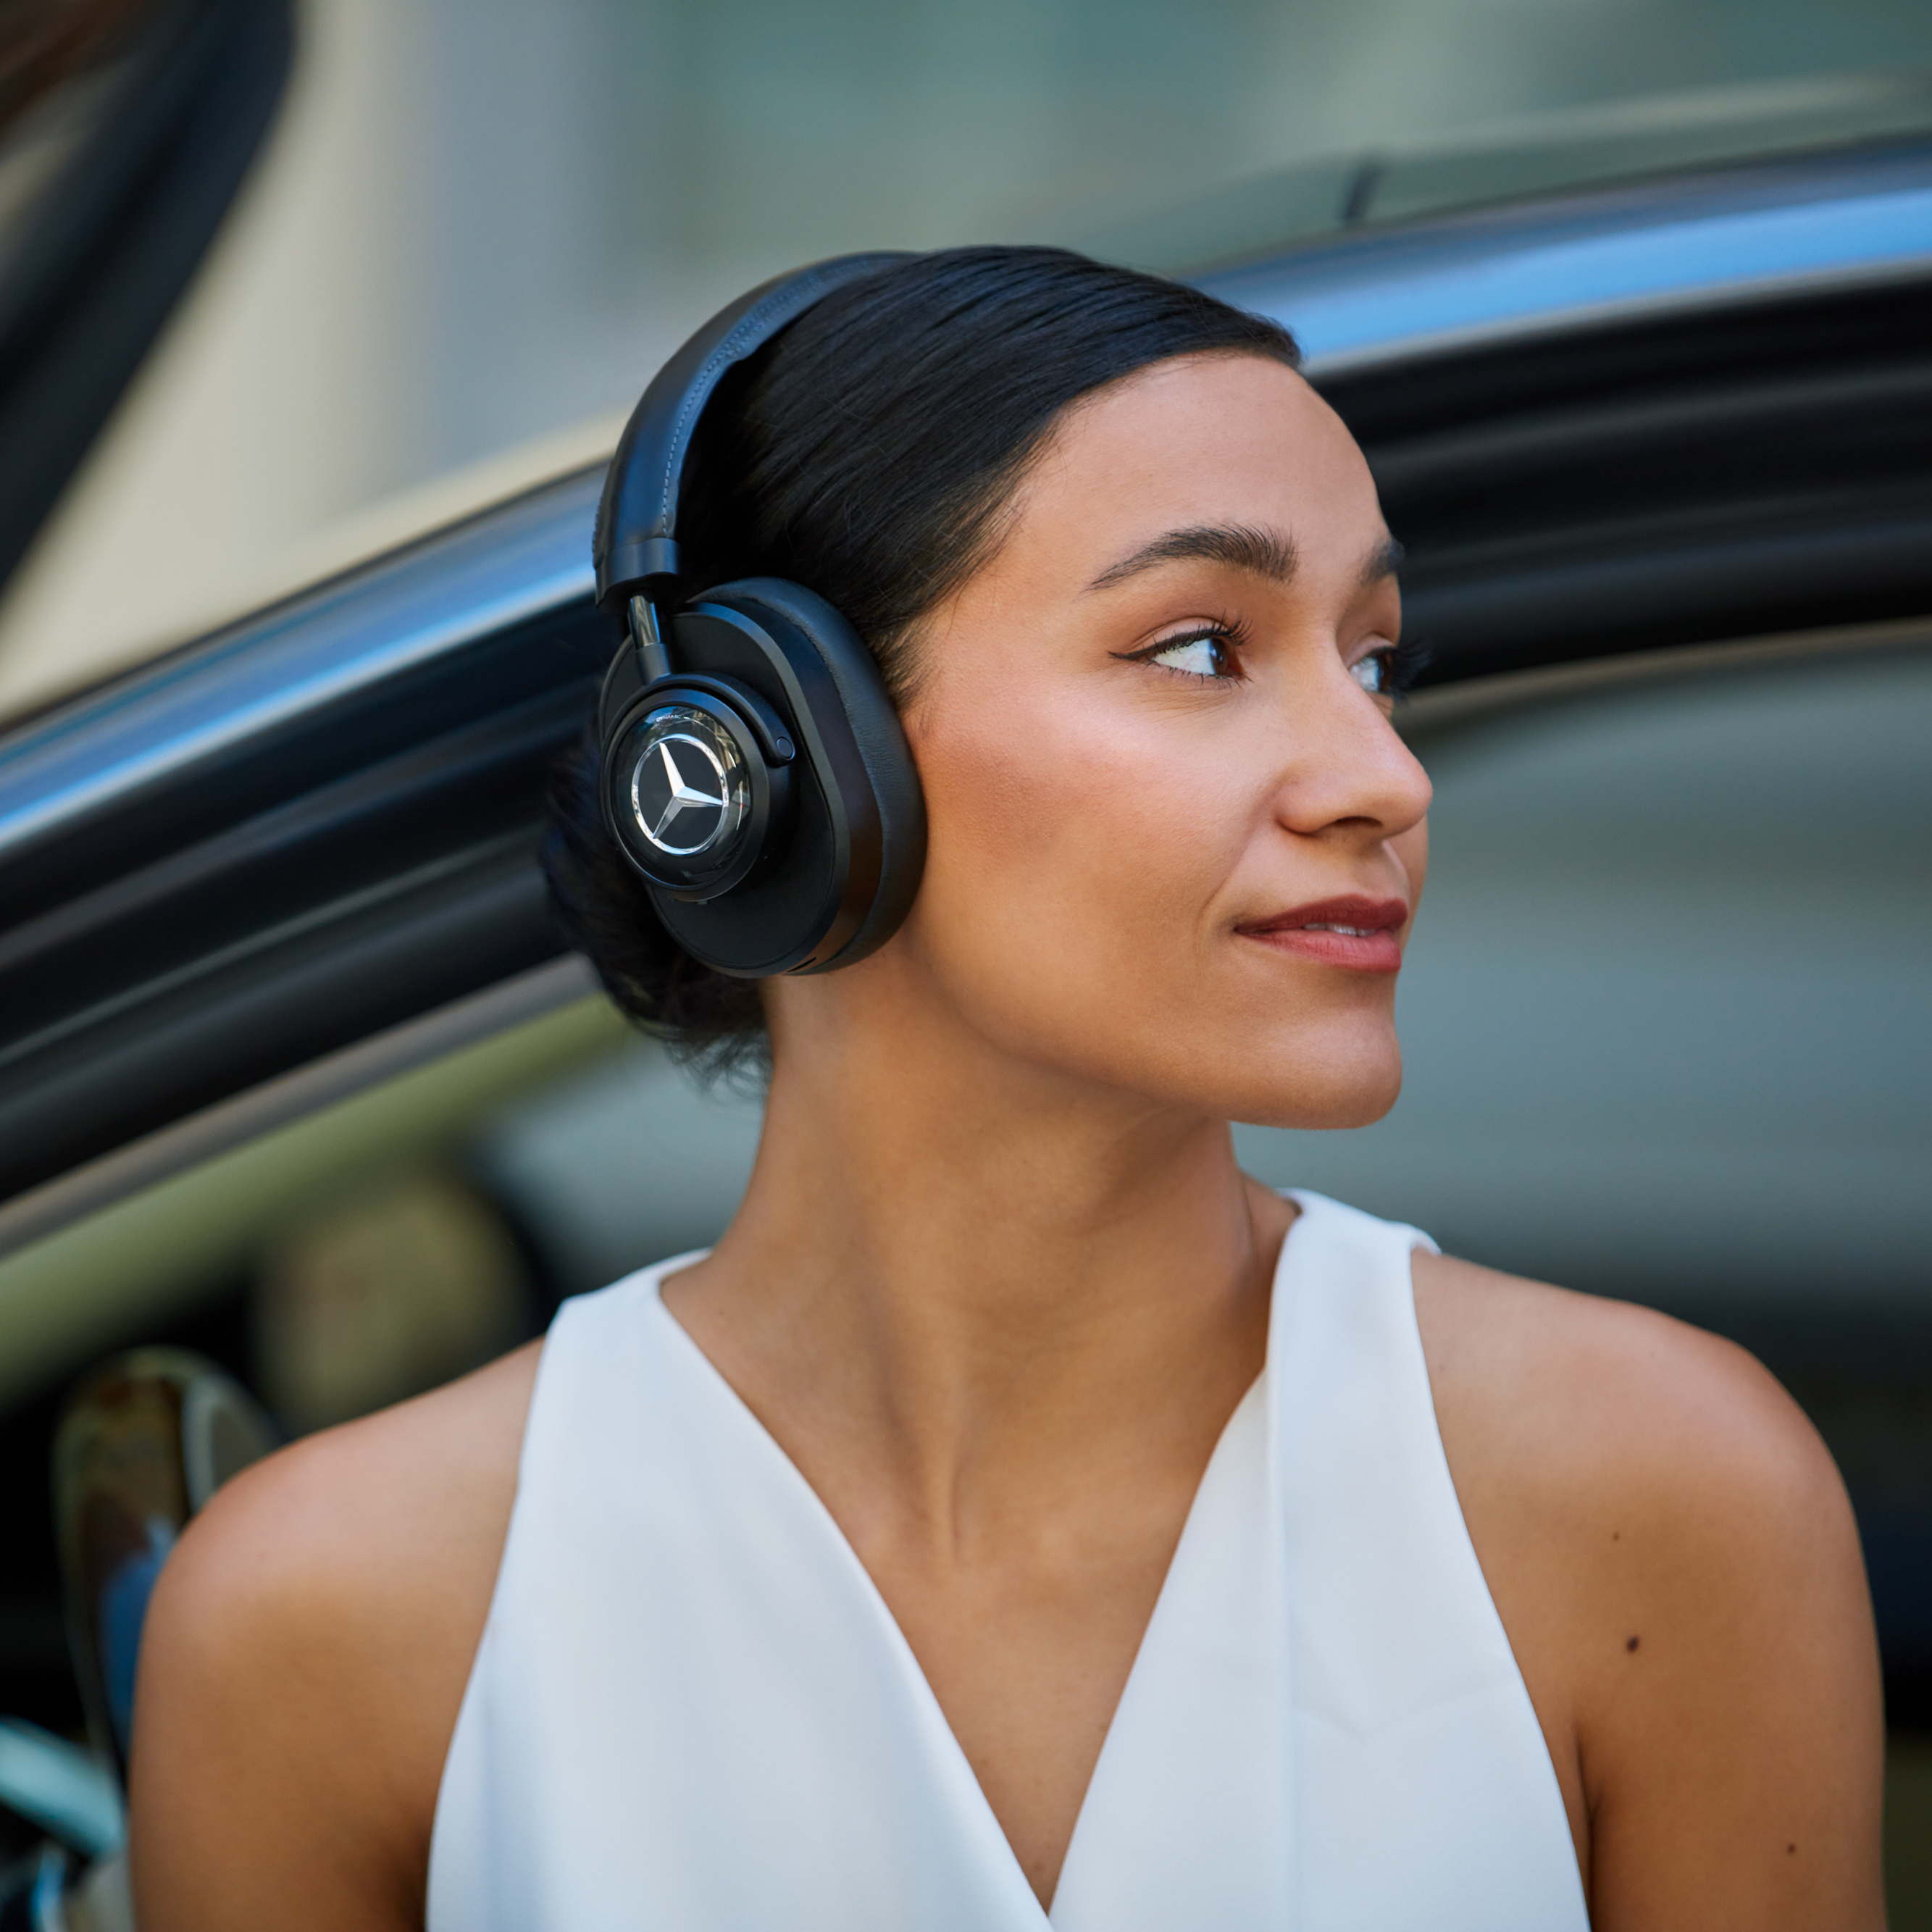 The Master & Dynamic for Mercedes-Benz MW65 Active Noise-Cancelling Headphones